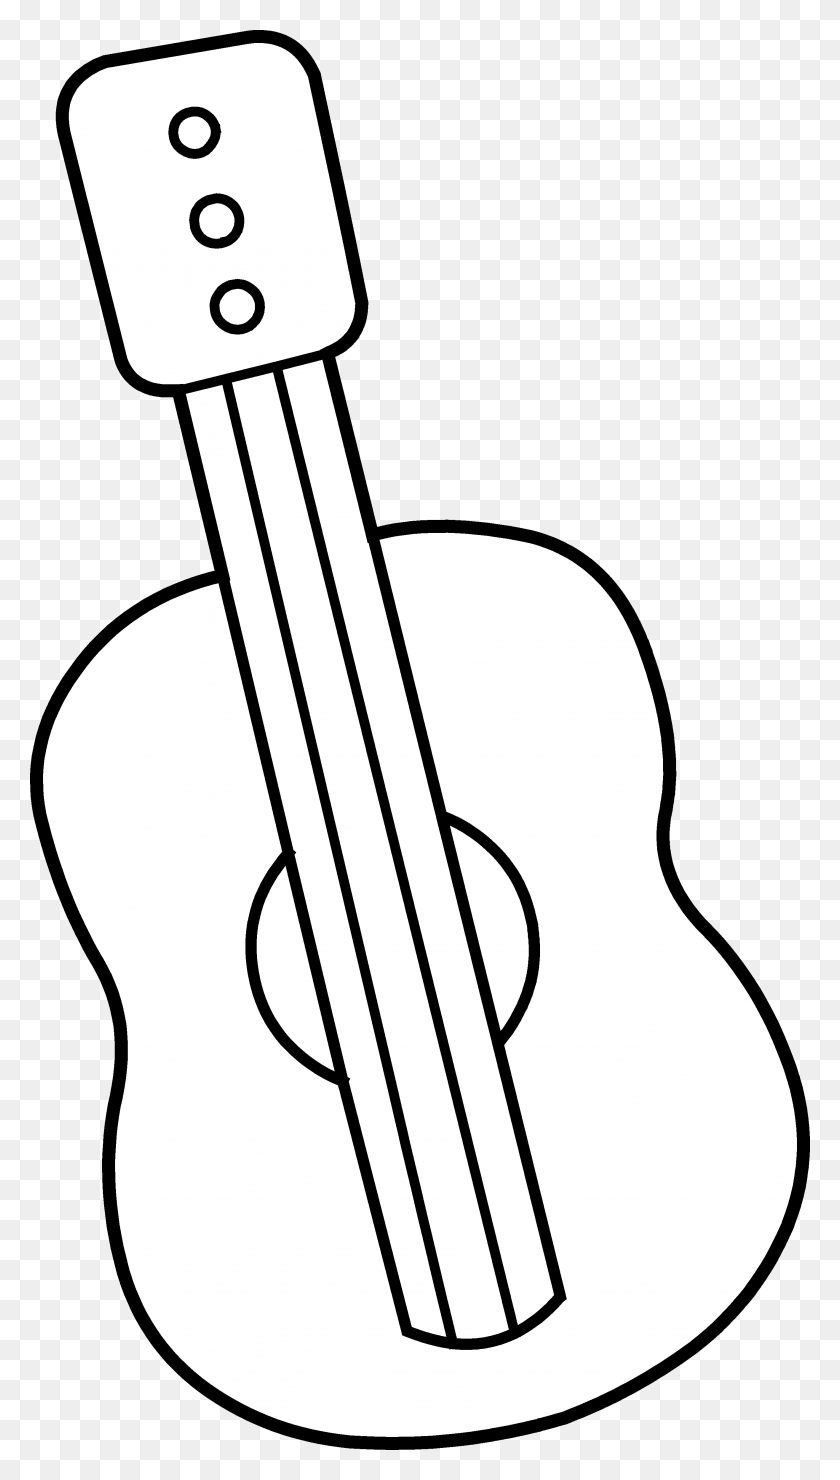 2632x4794 Musical Instrument Clipart Black And White Guitar Clip Art - What Is It Clipart